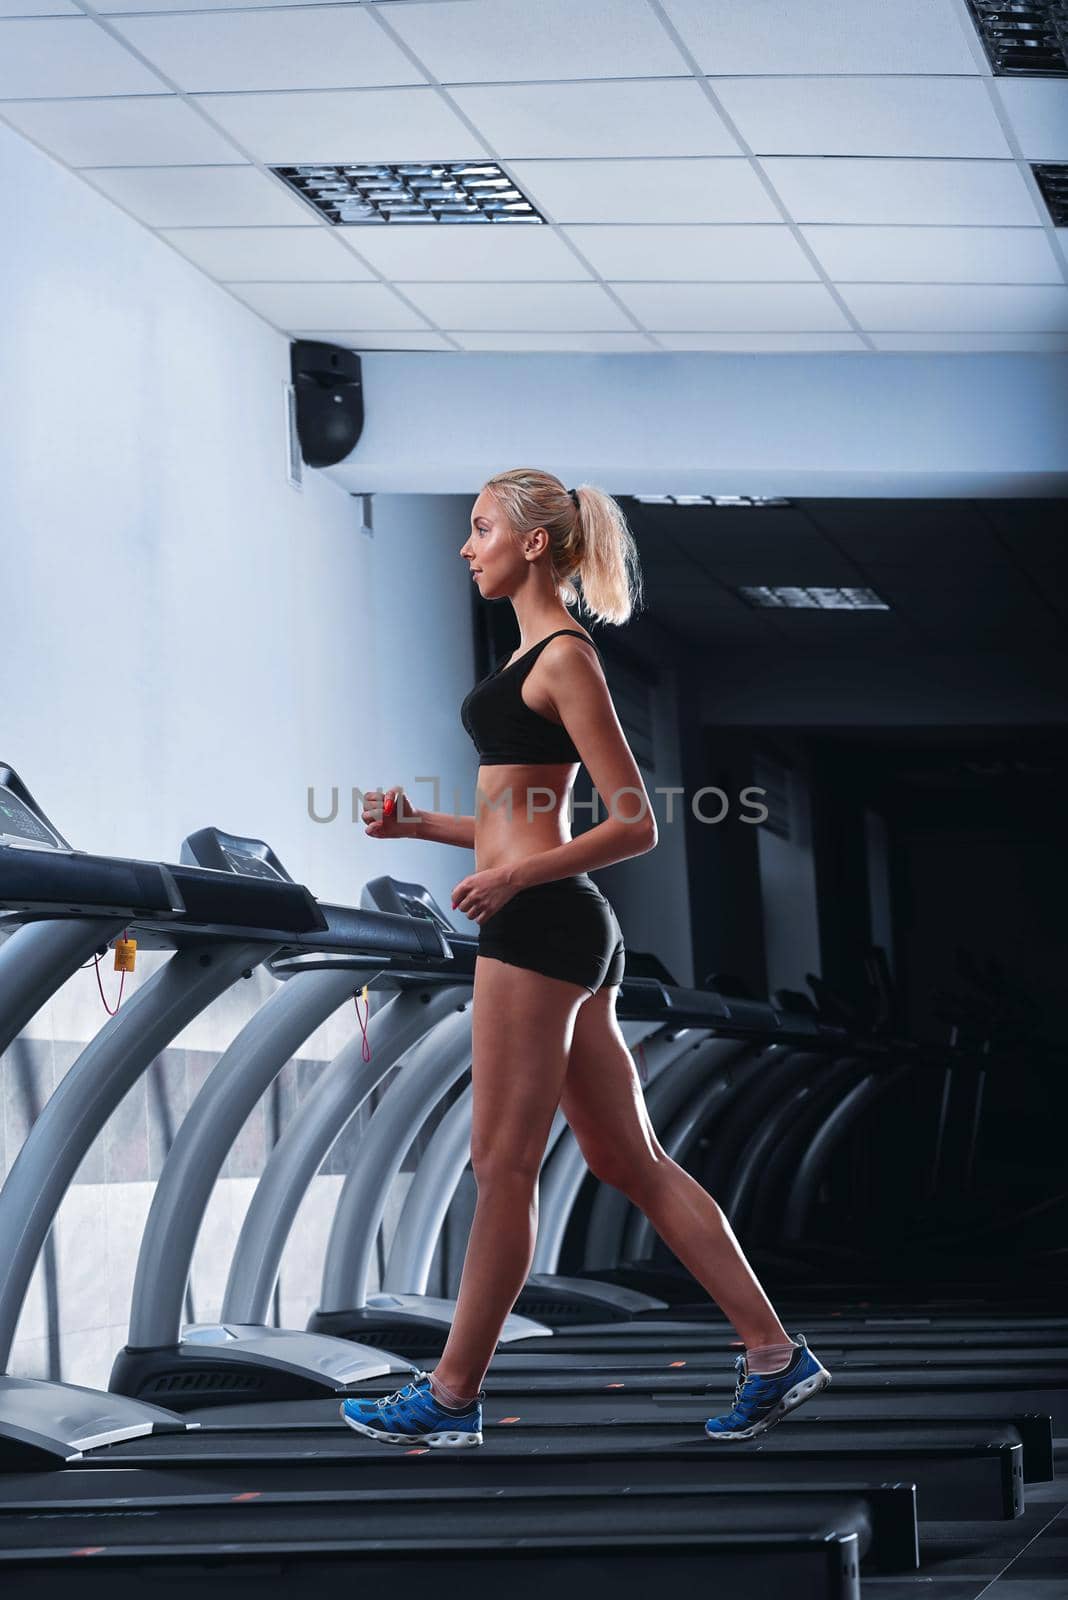 Vertical full length shot of a gorgeous young sportswoman with perfect strong toned body wearing sports top and shorts walking on a treadmill at the gym having her cardio workout at the health club .